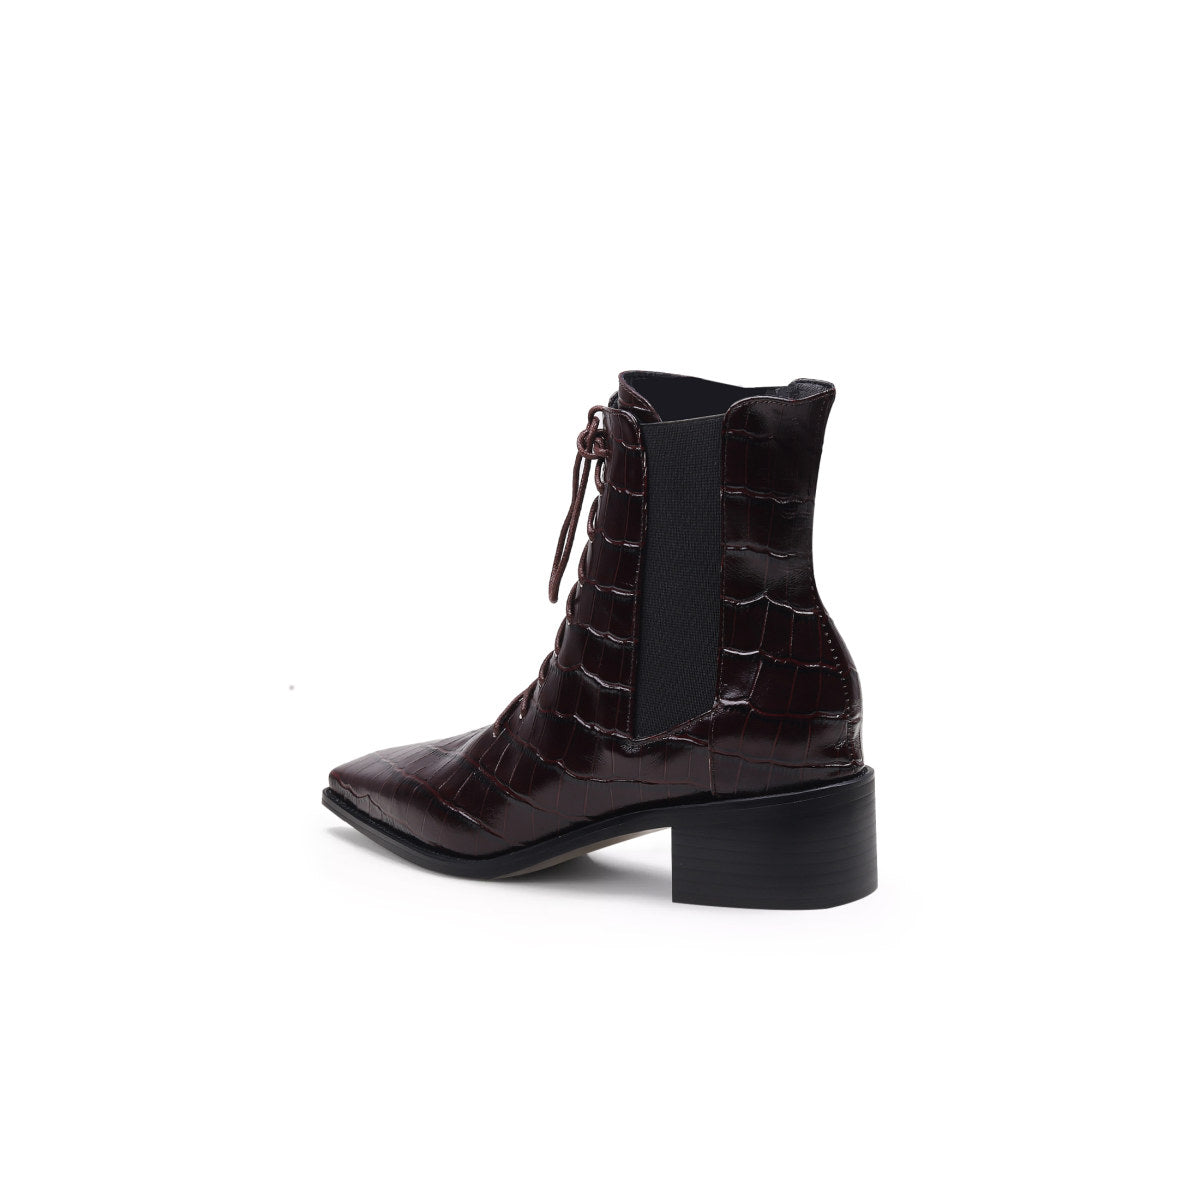 Reptile Lace-Up Elastic-Sided Wine Boots